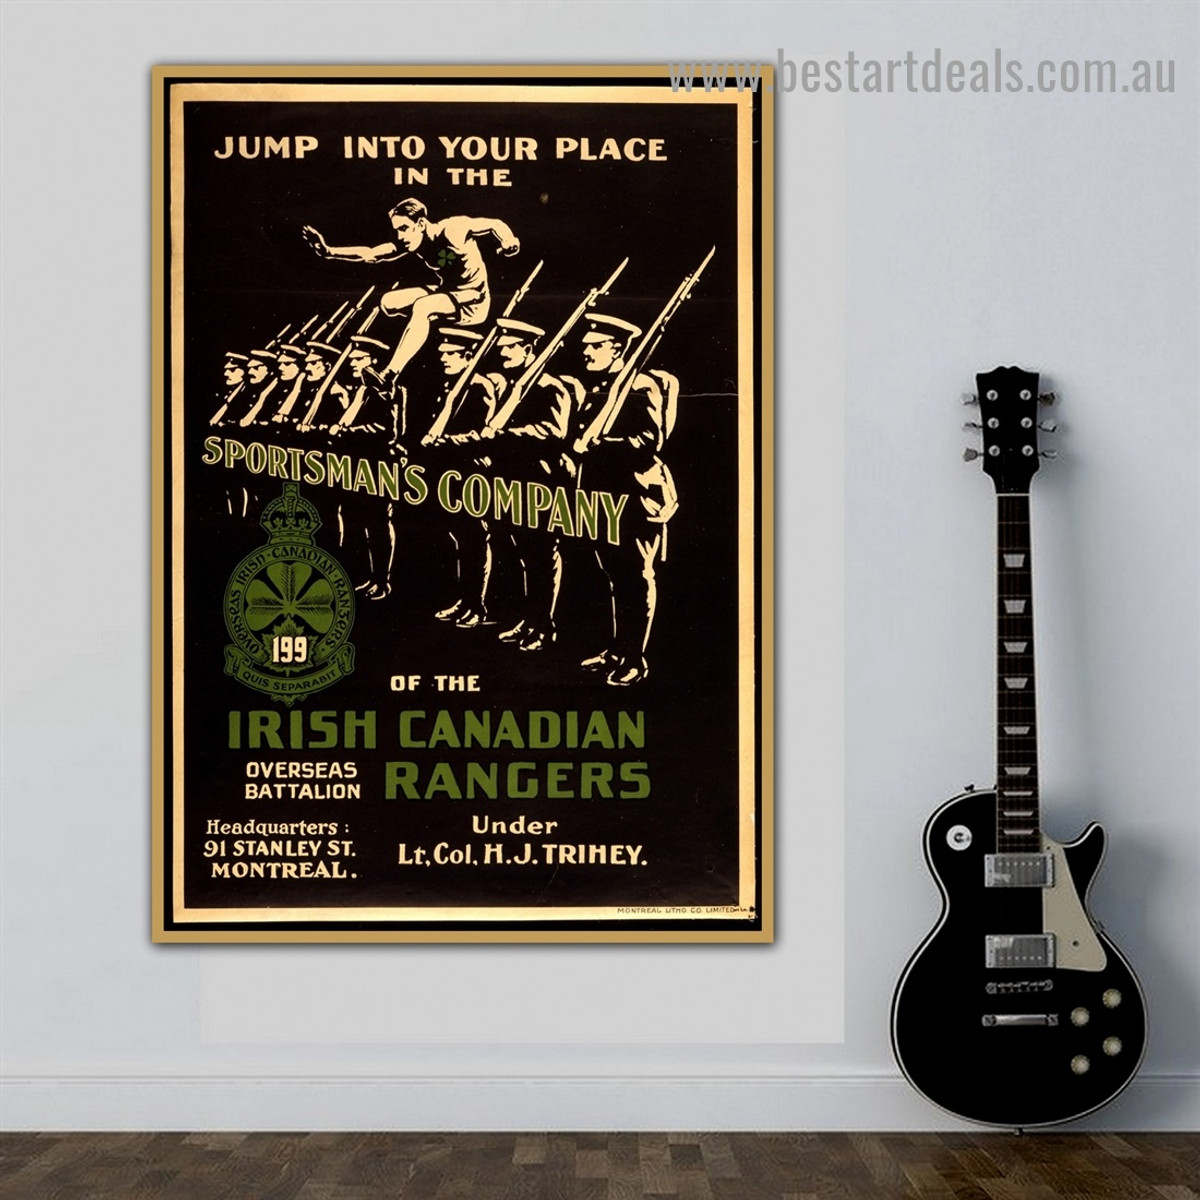 Irish Canadian Rangers Vintage Figure Reproduction Advertisement Poster Artwork Picture Canvas Print for Room Wall Garnish